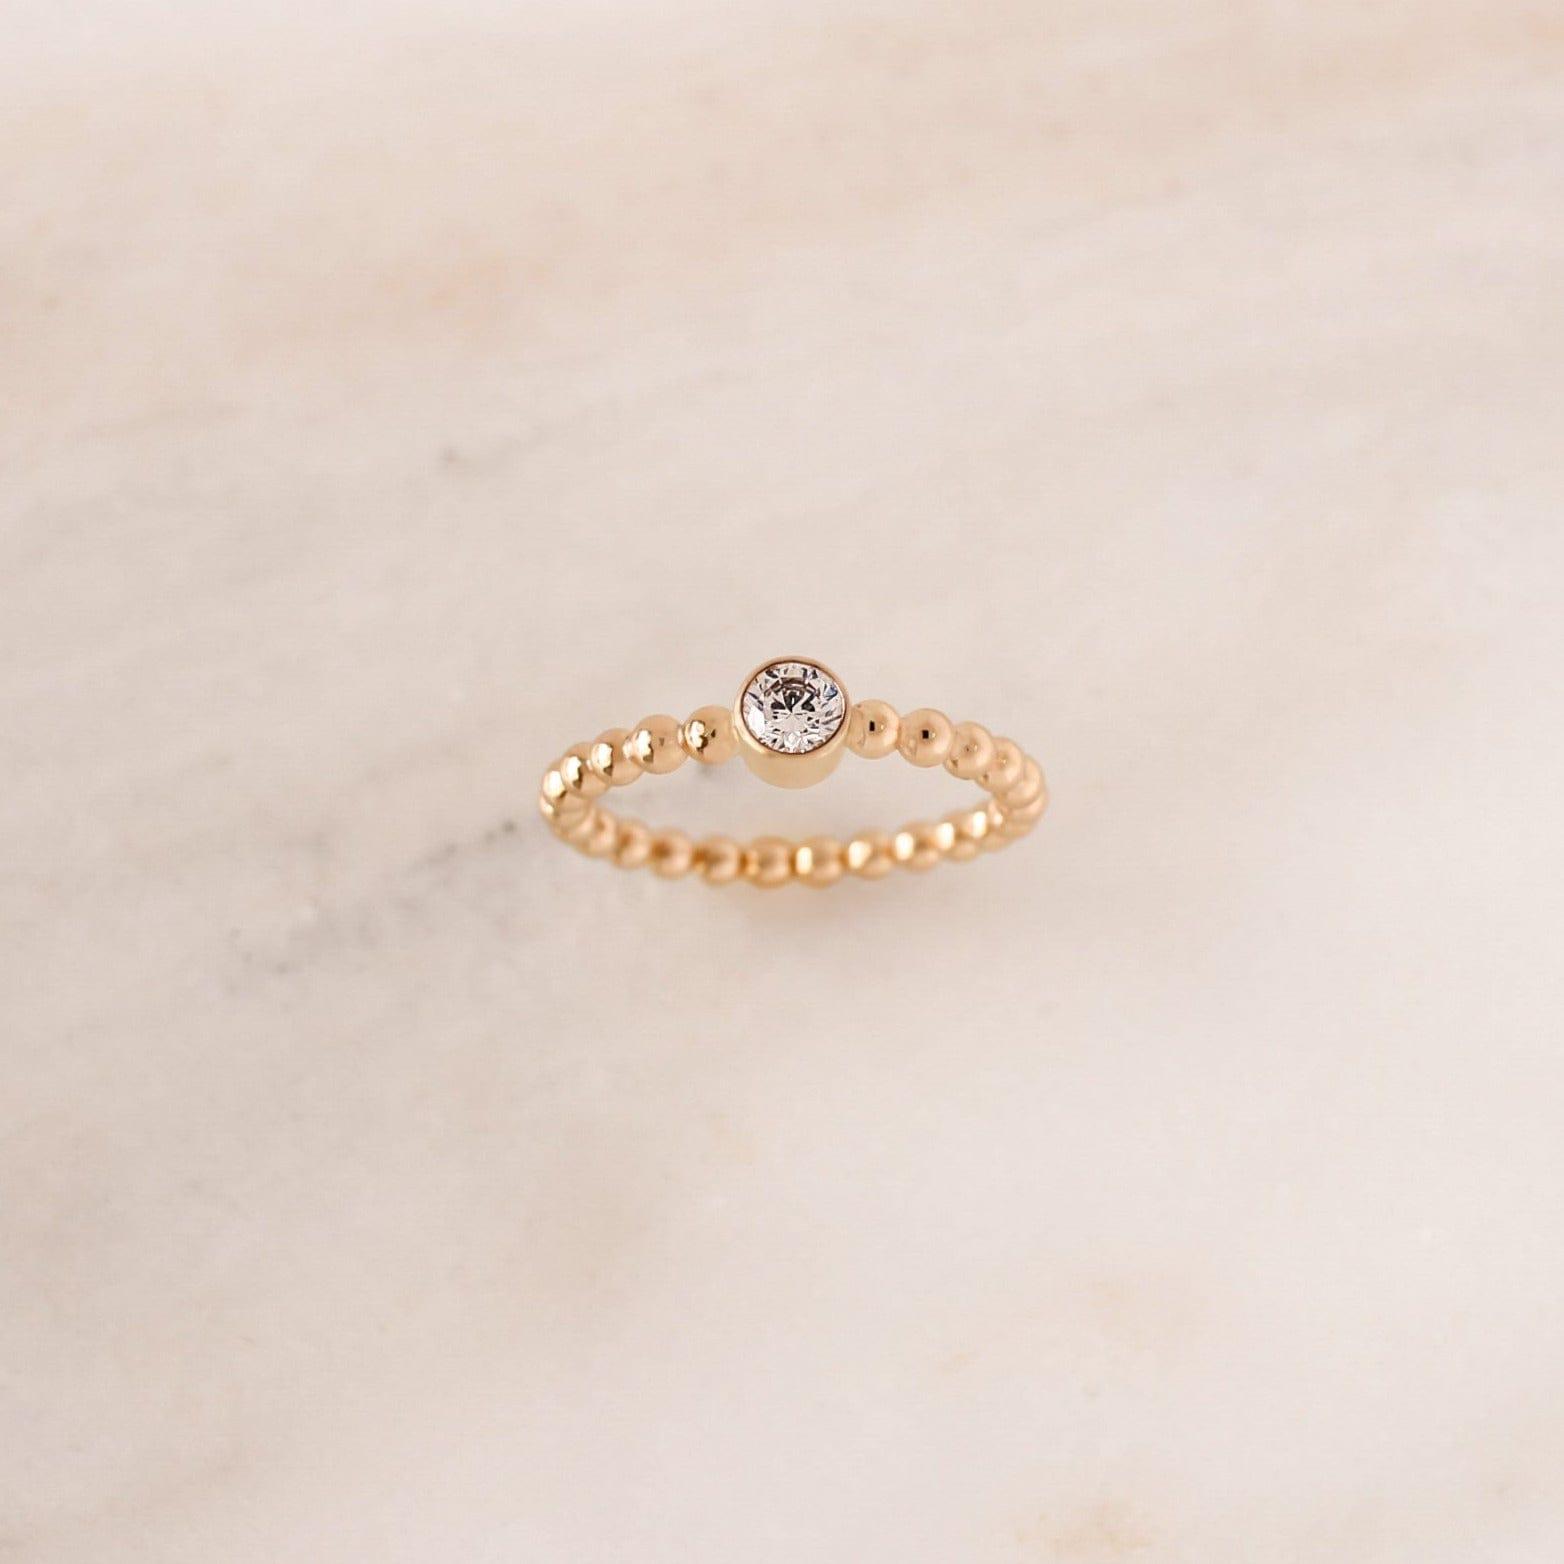 Mia Birthstone Ring - Nolia Jewelry - Meaningful + Sustainably Handcrafted Jewelry